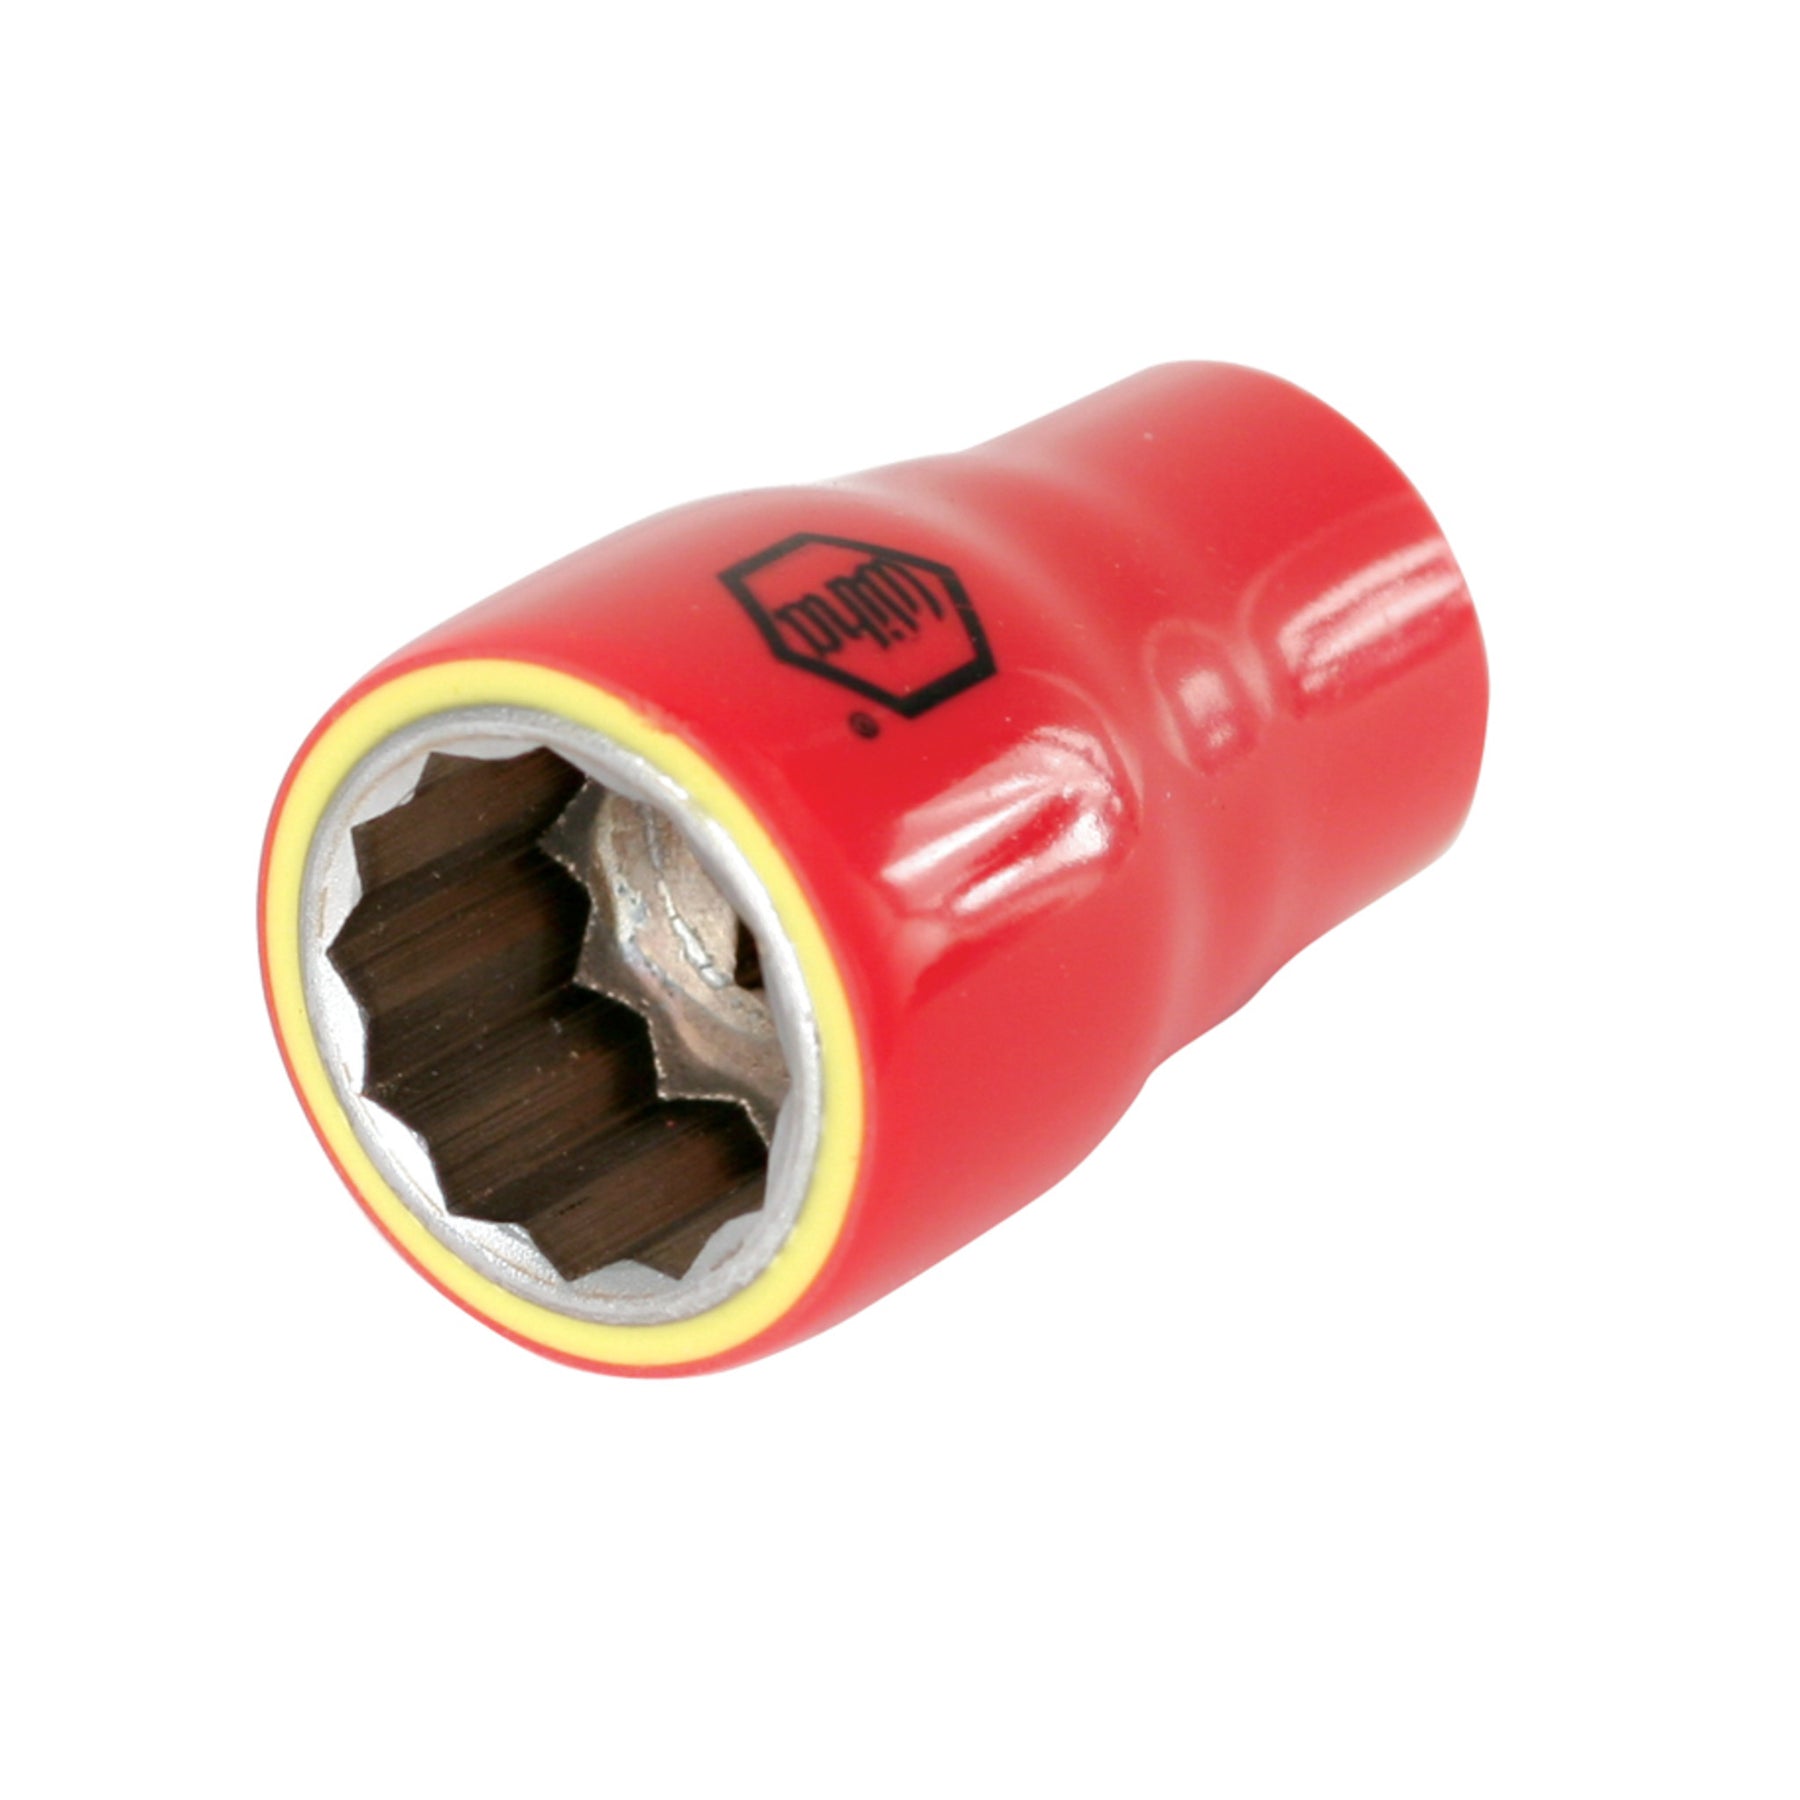 Insulated Socket 1/2" Drive 19mm